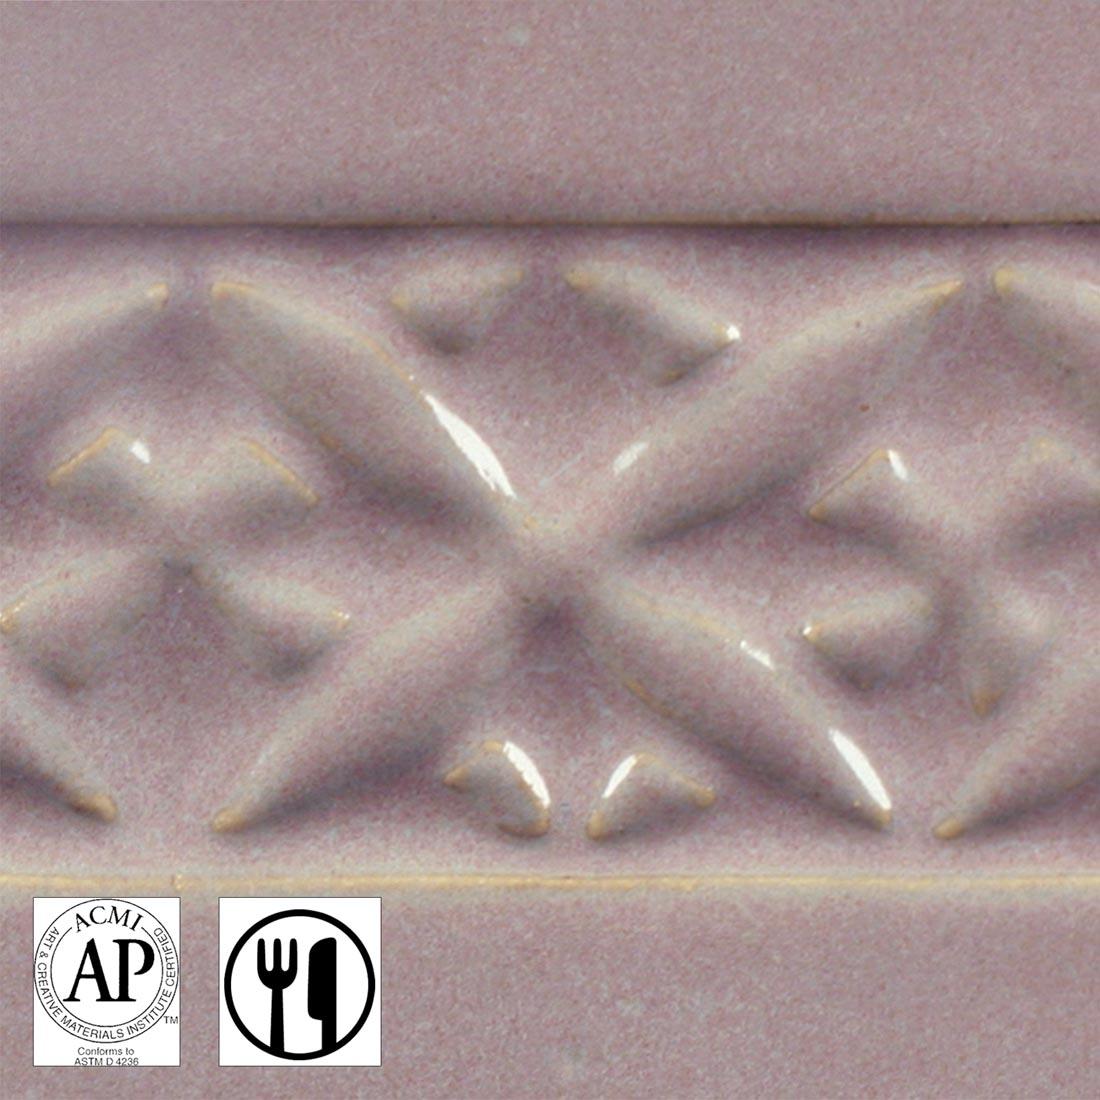 clay tile with Toasted Sage AMACO Potter's Choice High Fire Glaze applied; symbols for AP Seal and food safe